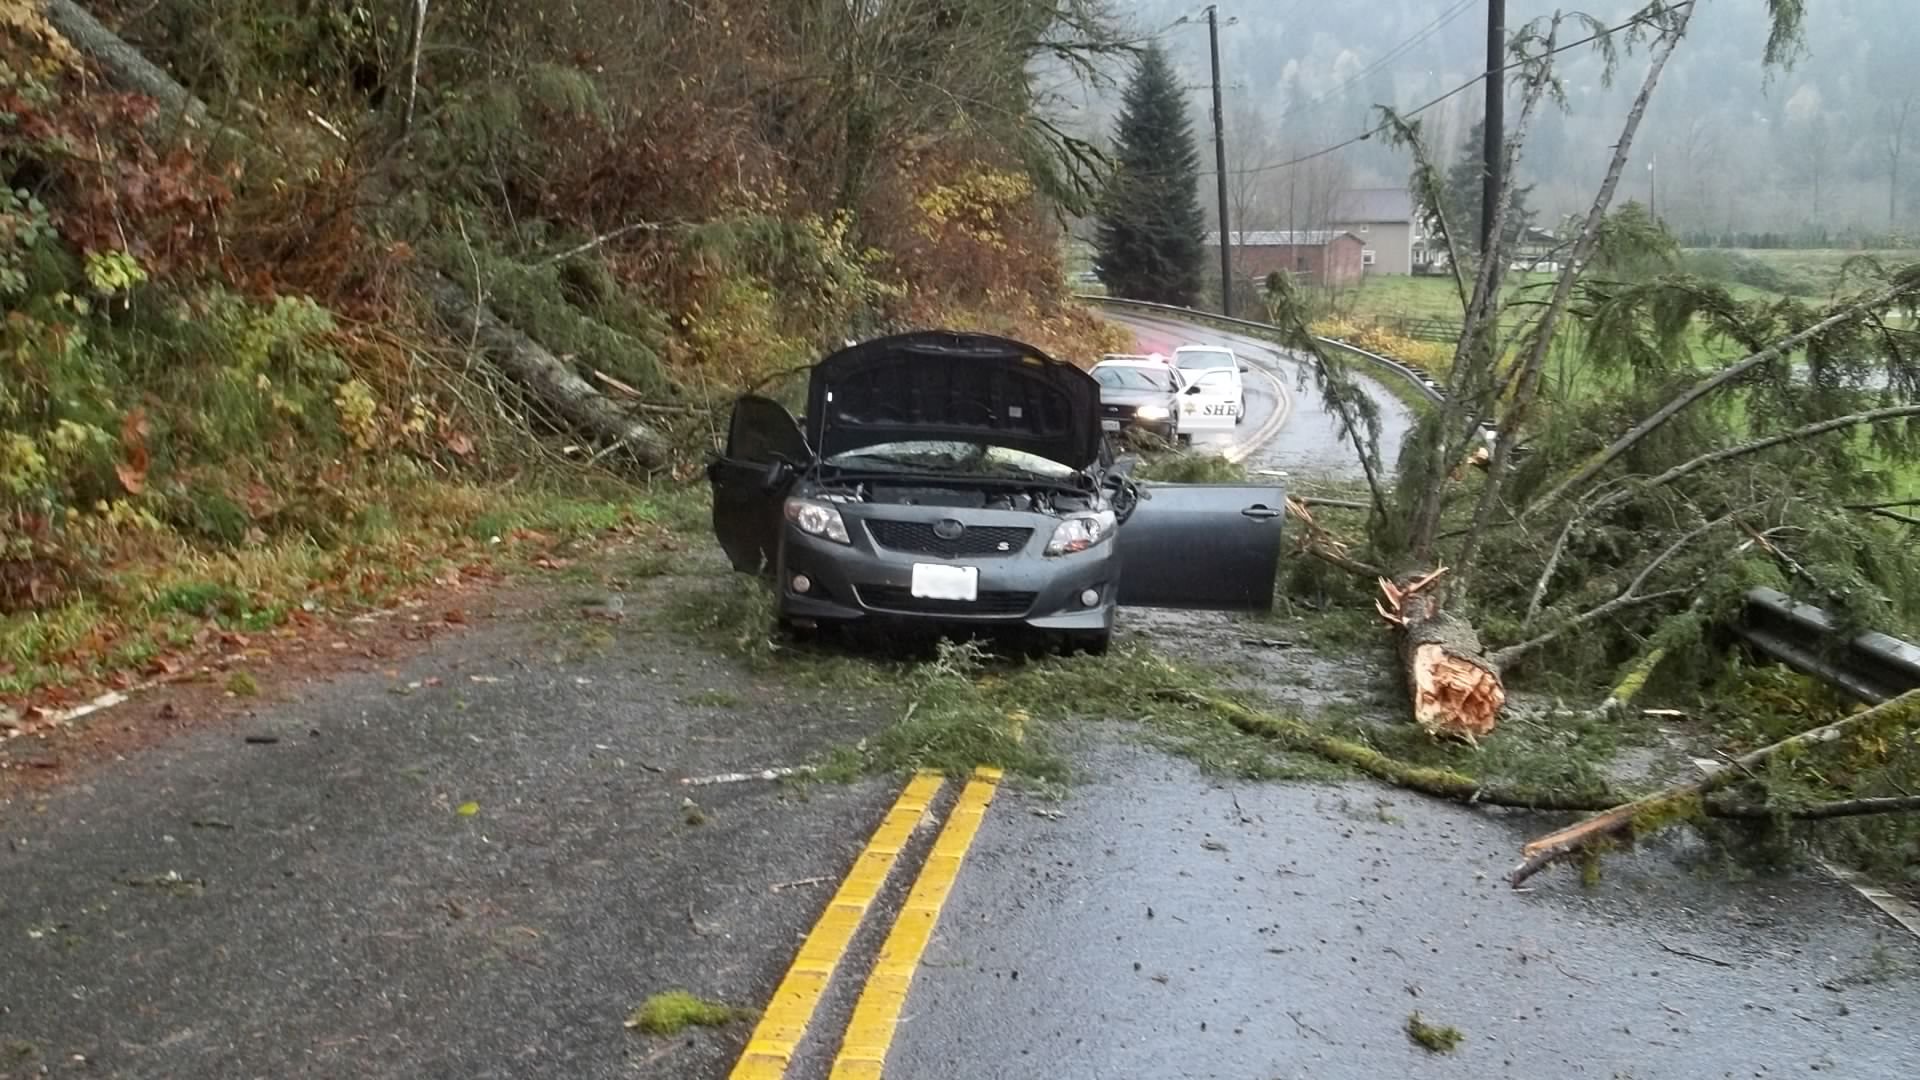 Near Seattle, a large tree fell on a car, killing a man in his twenties as the worst of the weather began to move in, the Snohomish County Sheriff's Office said. Around Seattle, more than 150,000 customers were without power, Puget Sound Energy reported.